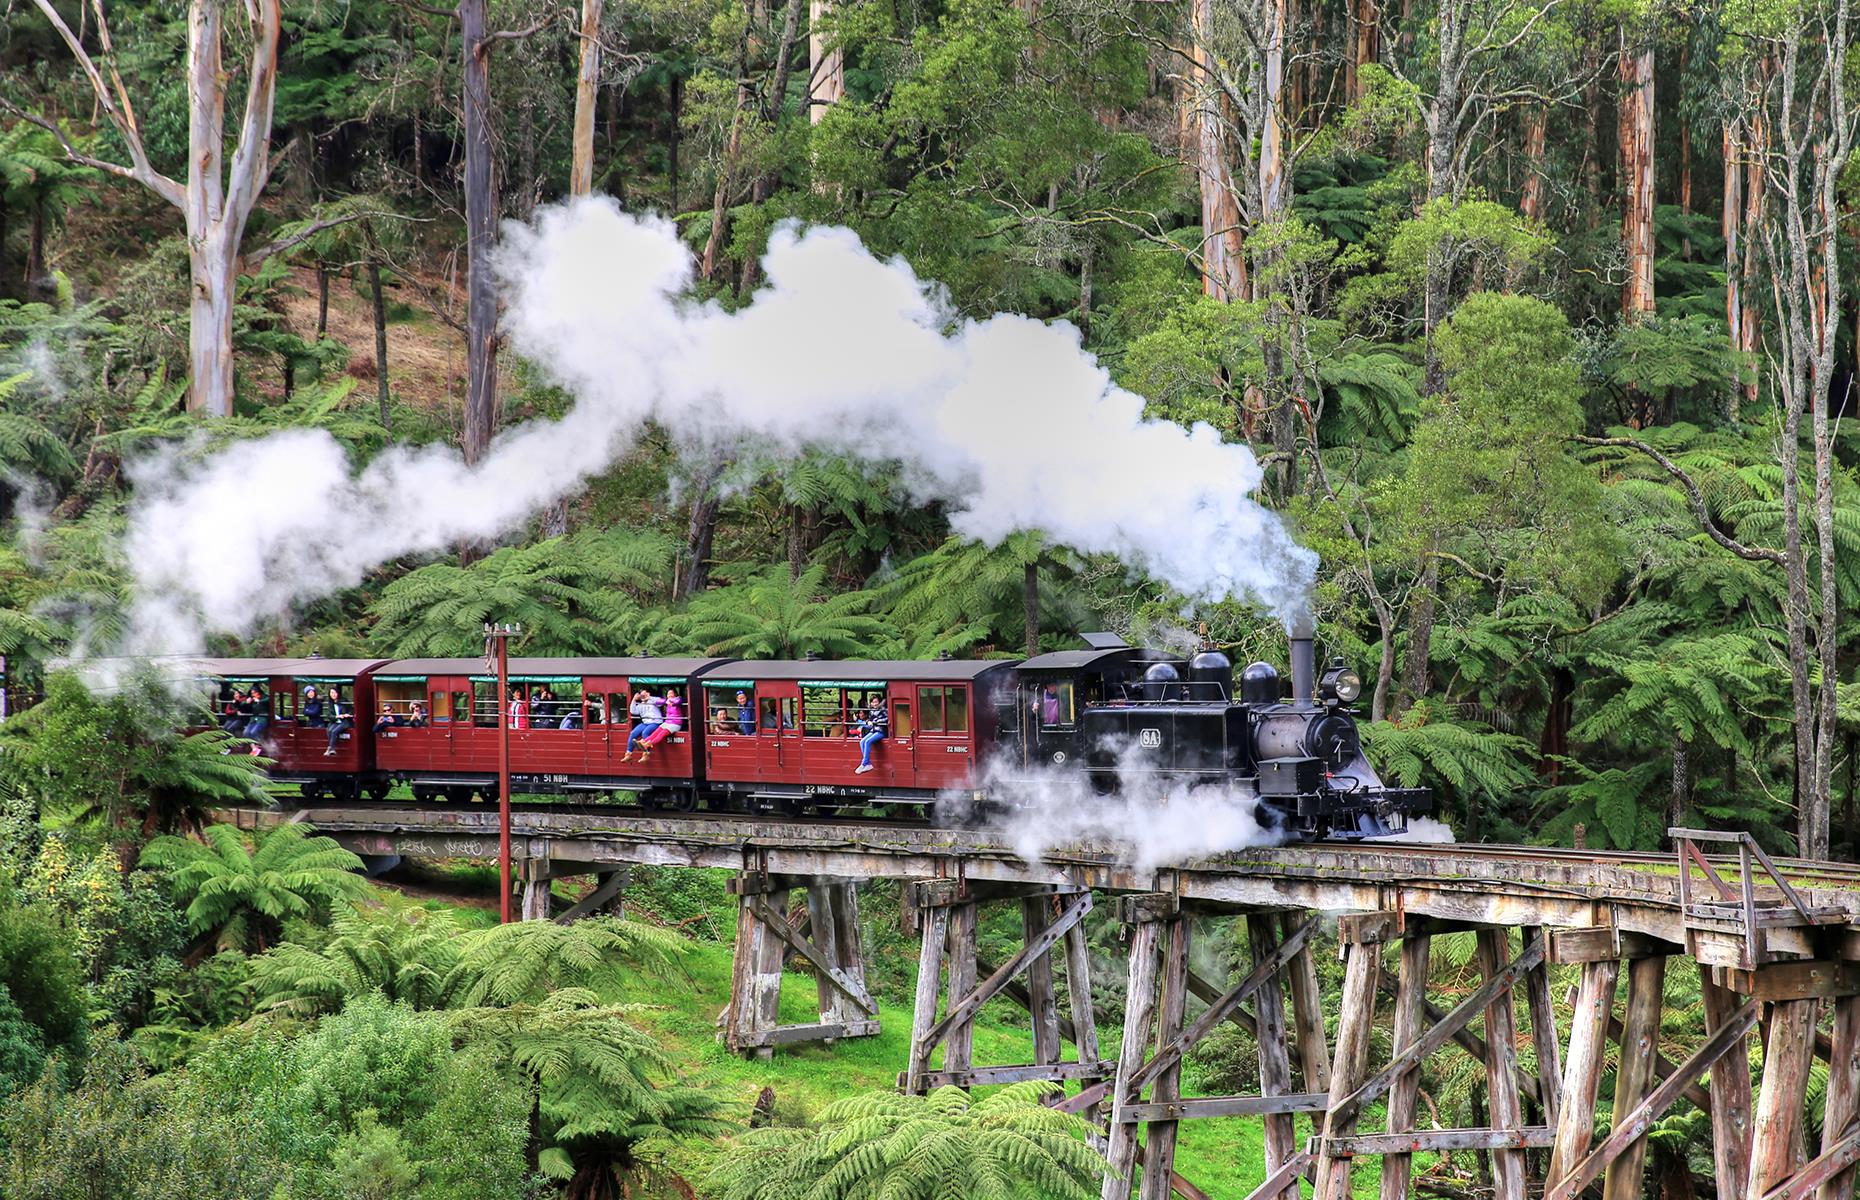 <p>It's also a hugely popular family outing too. The Puffing Billy is famed for its open-side carriages where people can sit on the carriage sills and dangle their legs, all while taking in the views of the hills, forests, lush gullies and the railway's soaring timber trestle bridges. Trains run daily with one train offering a lunch service. Dinner service is available on Fridays and Saturdays – it's advised to book well in advance. The railway also has doggy specials known as the Puffing Billy Dog Express.</p>